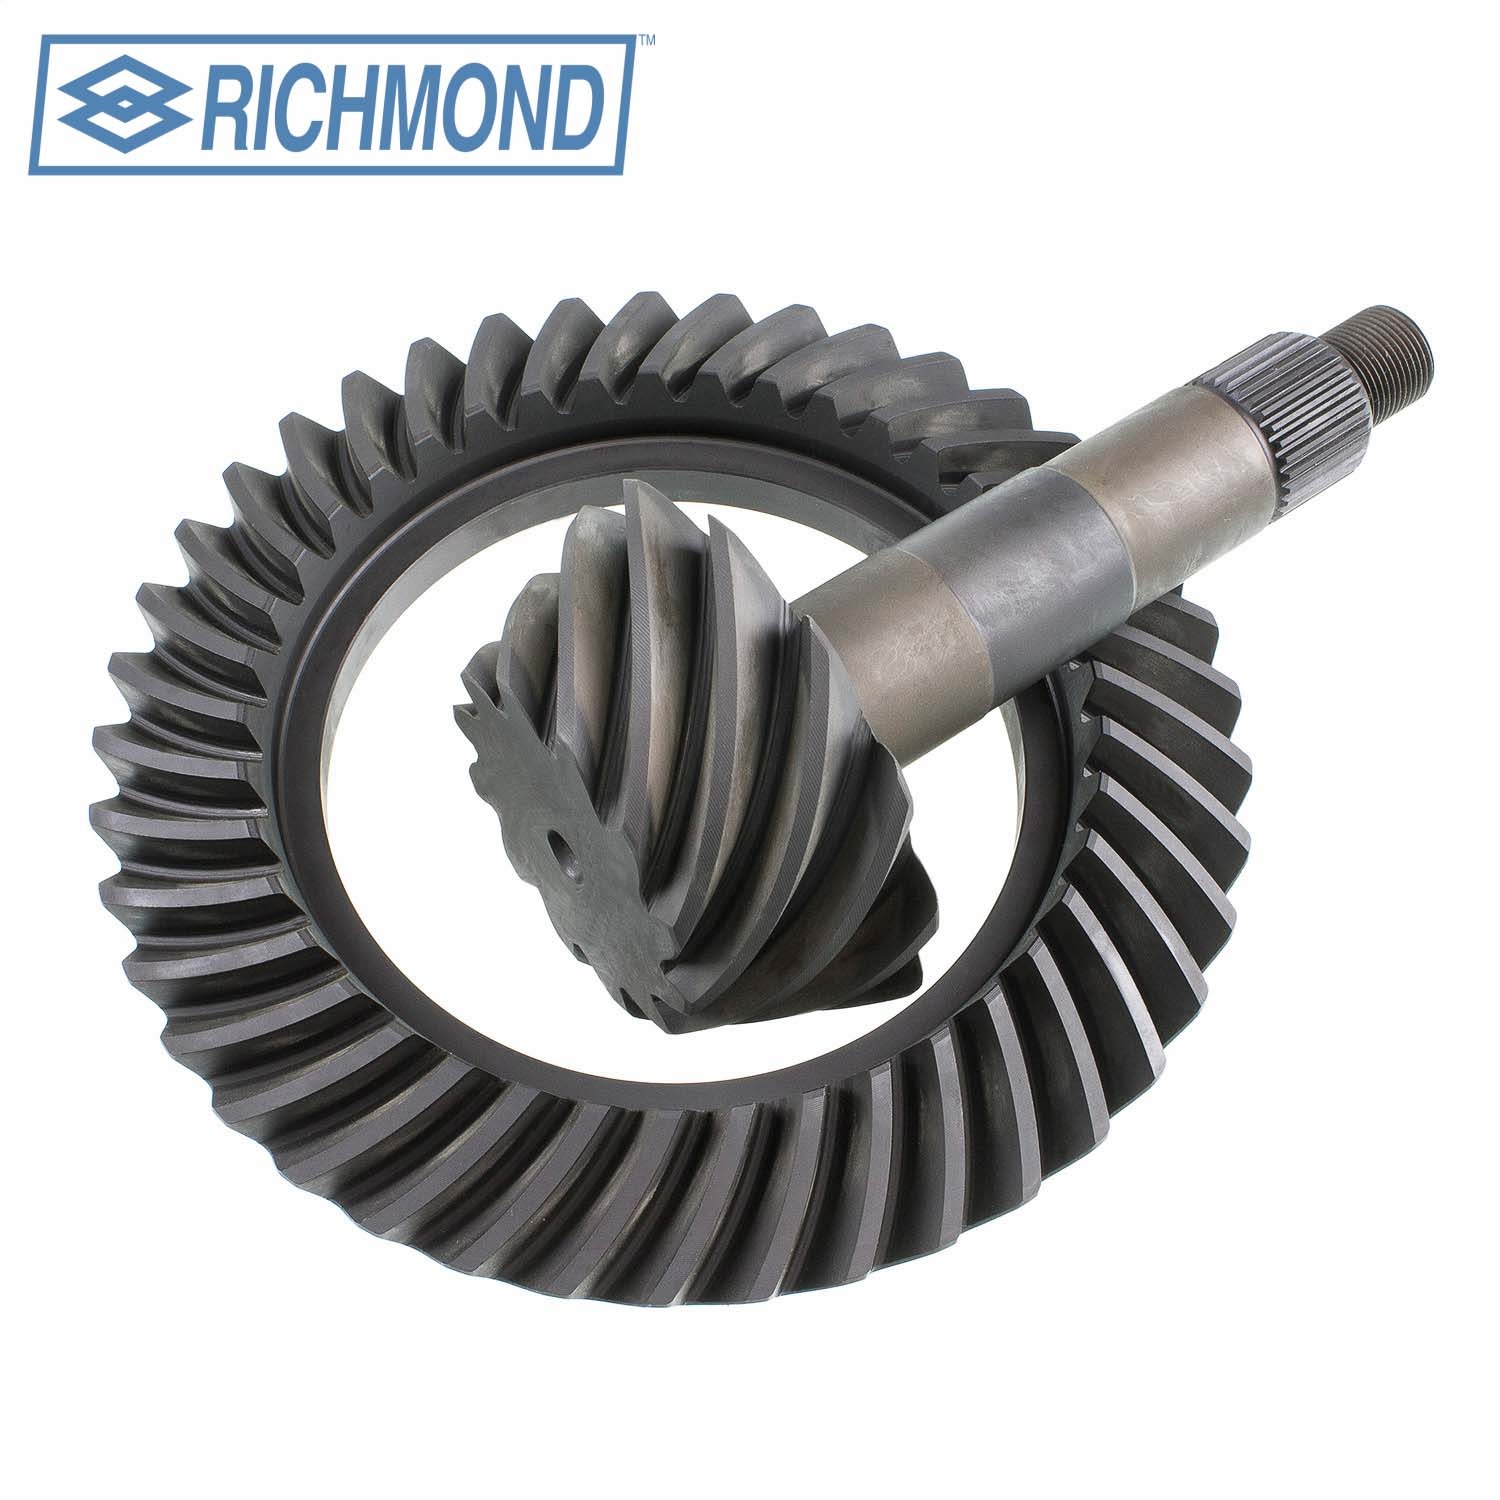 Richmond Gear 49-0070-1 Street Gear Differential Ring and Pinion